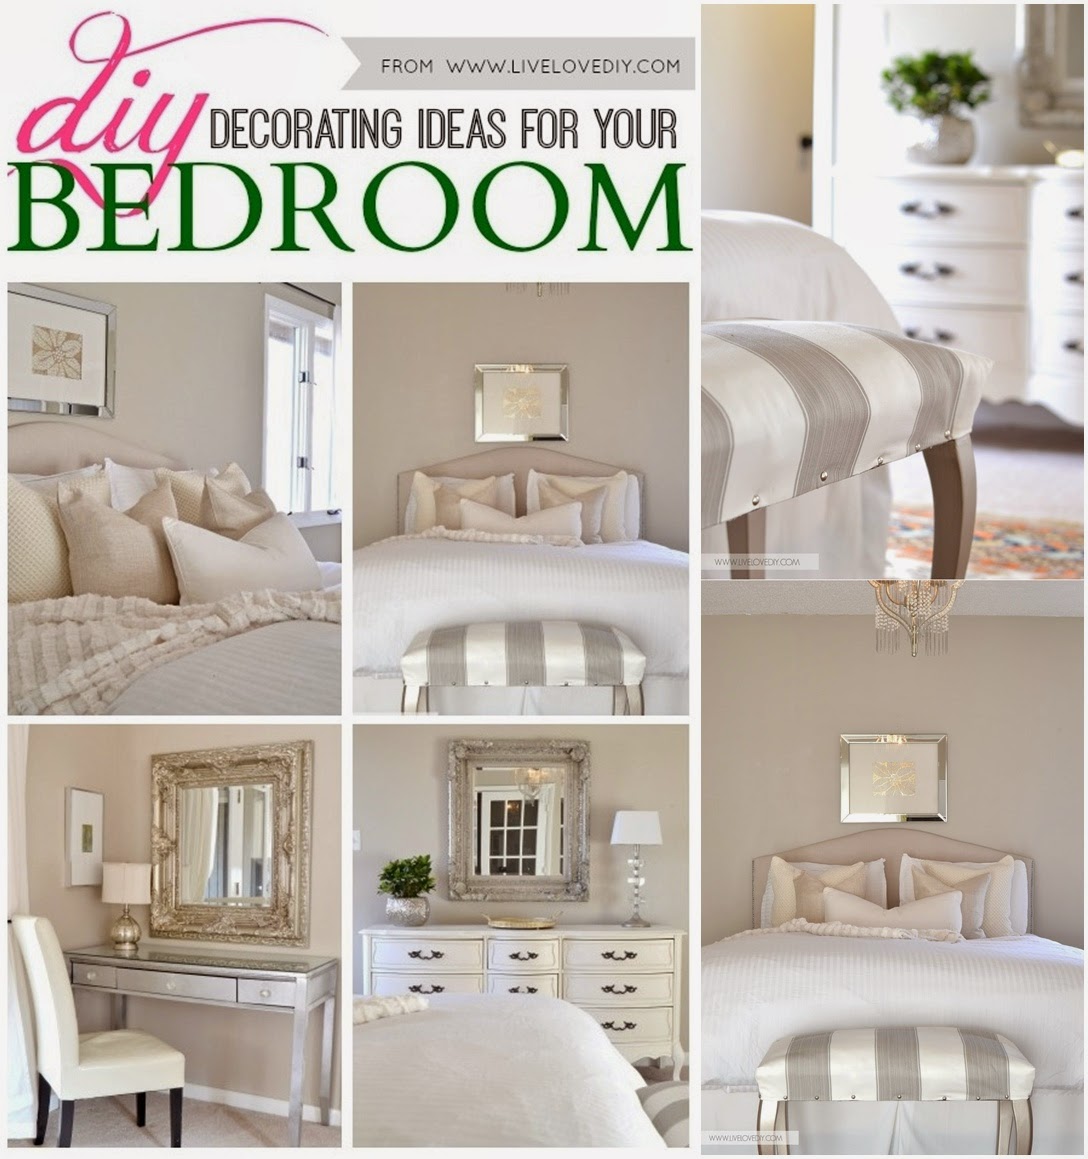 DIY Decorating Ideas for Your Bedroom  DIY Craft Projects